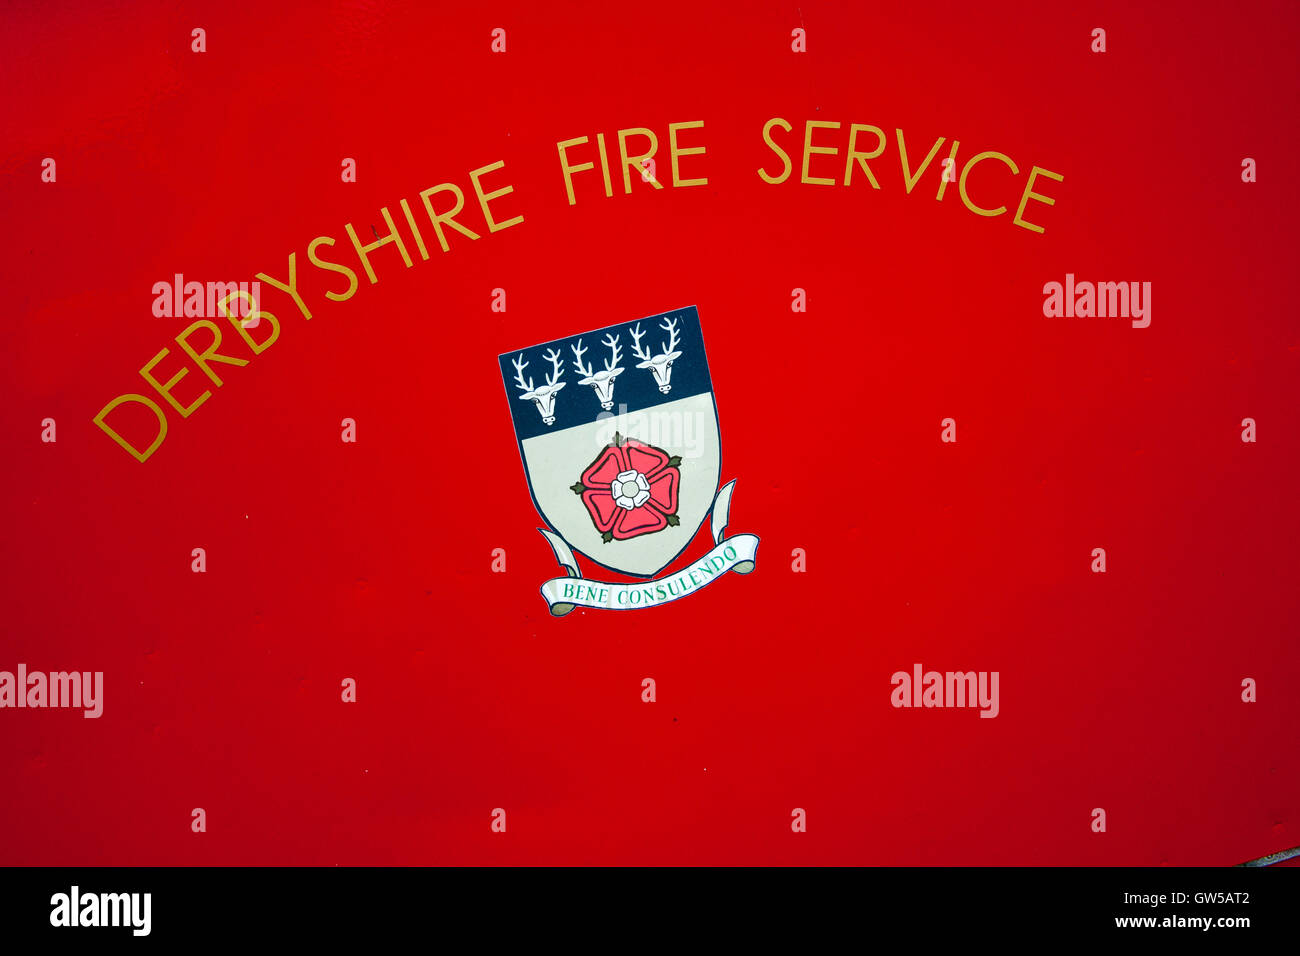 Derbyshire Fire & Rescue Service & County Council's coat of arms, UK Stock Photo